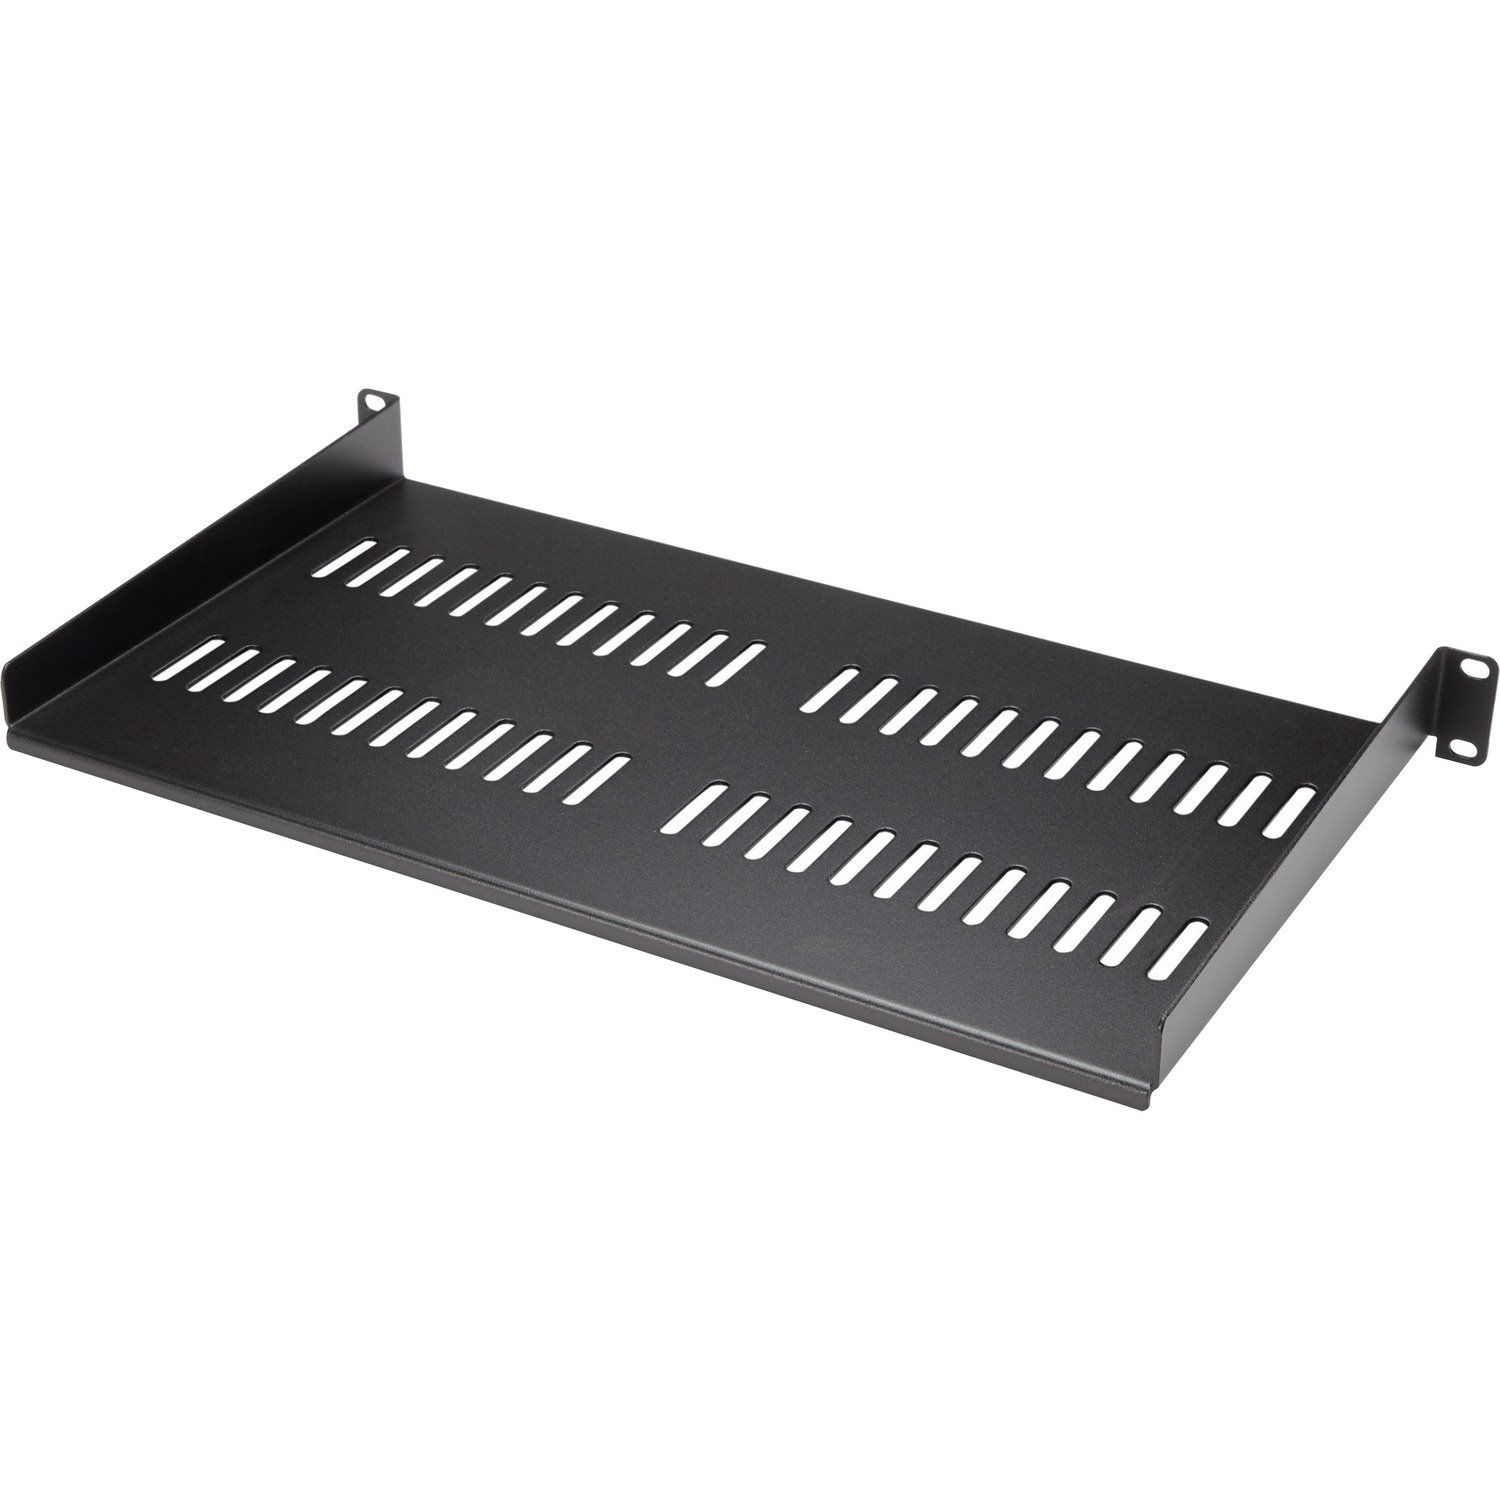 StarTech.com 1U Vented Server Rack Cabinet Shelf - Fixed 10in Deep Cantilever Rackmount Tray for 19" Data/AV/Network Enclosure w/Cage Nuts